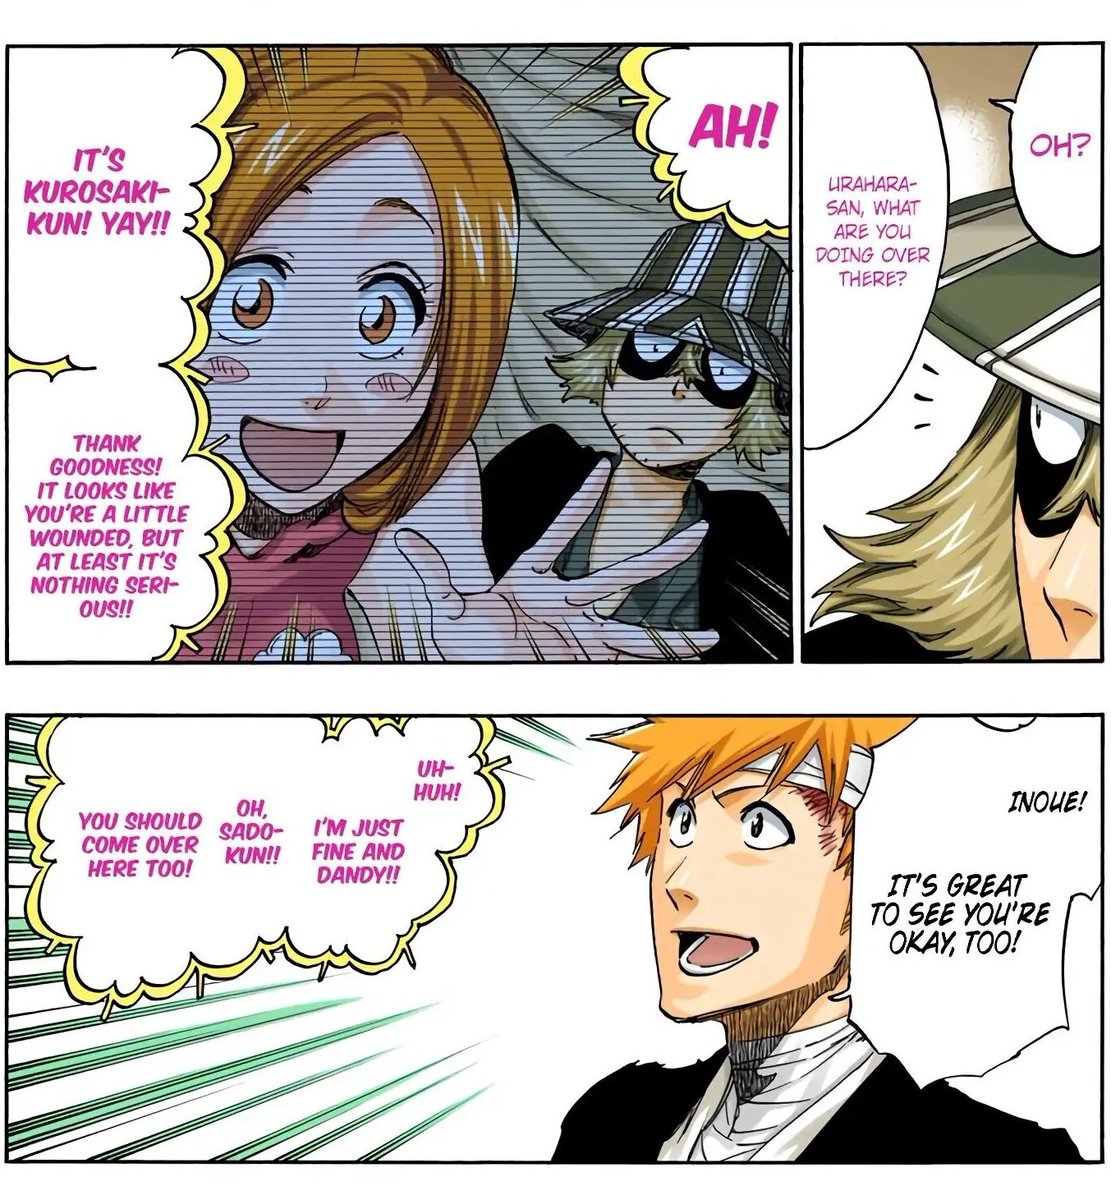 yo #ichihime fellas i didnt know ichigo couldn't even smile once to orihime 😭😭😭😭😭 so these panels below are ichigo being mad at her??? omg im so saddd :(((((